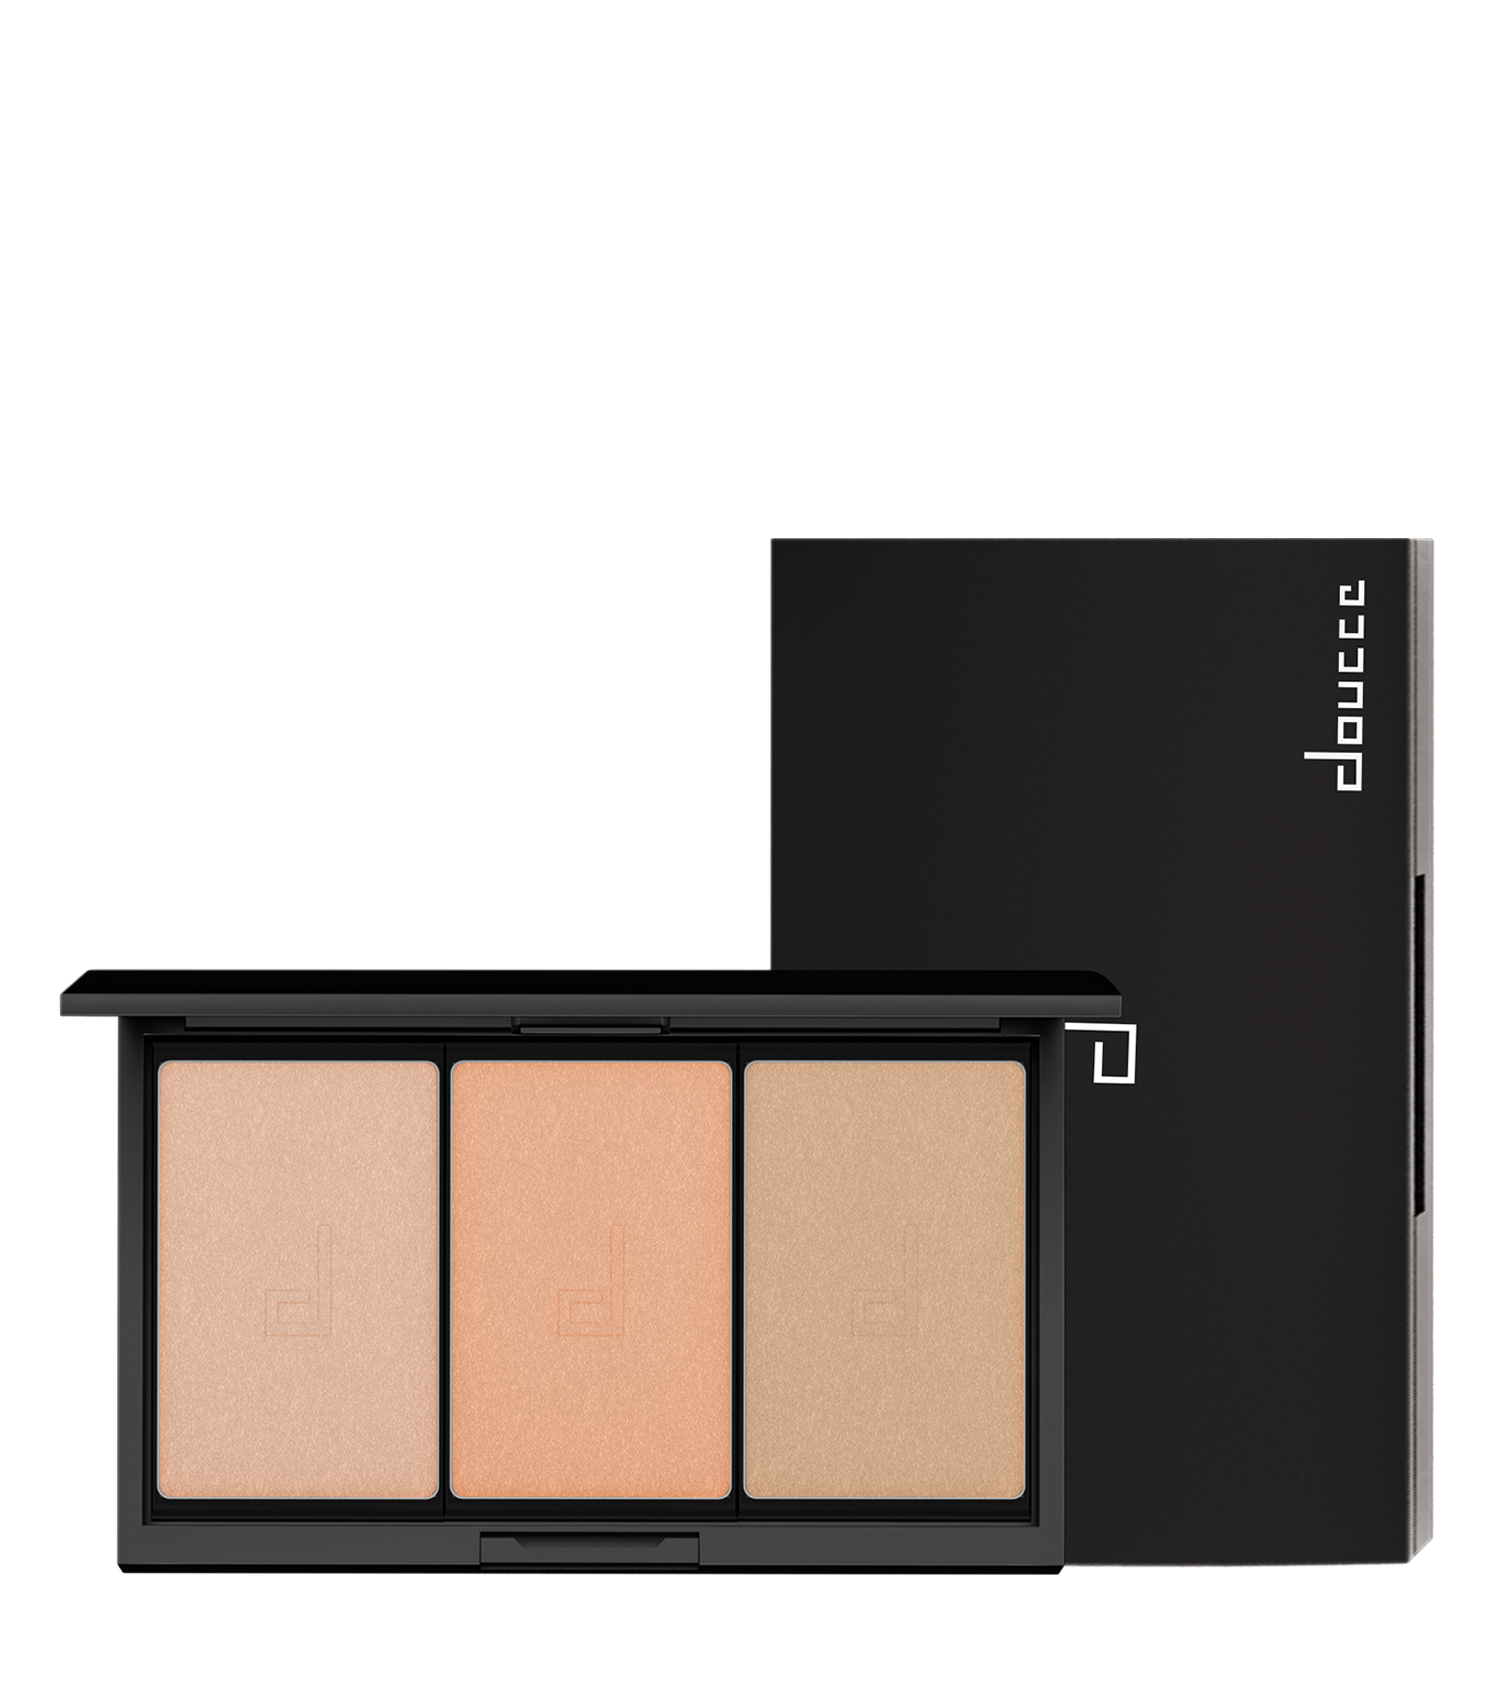 Freematic Pro Palette - Highlighter Freematic Highlighter Mono - Sparked Ray (101) 1